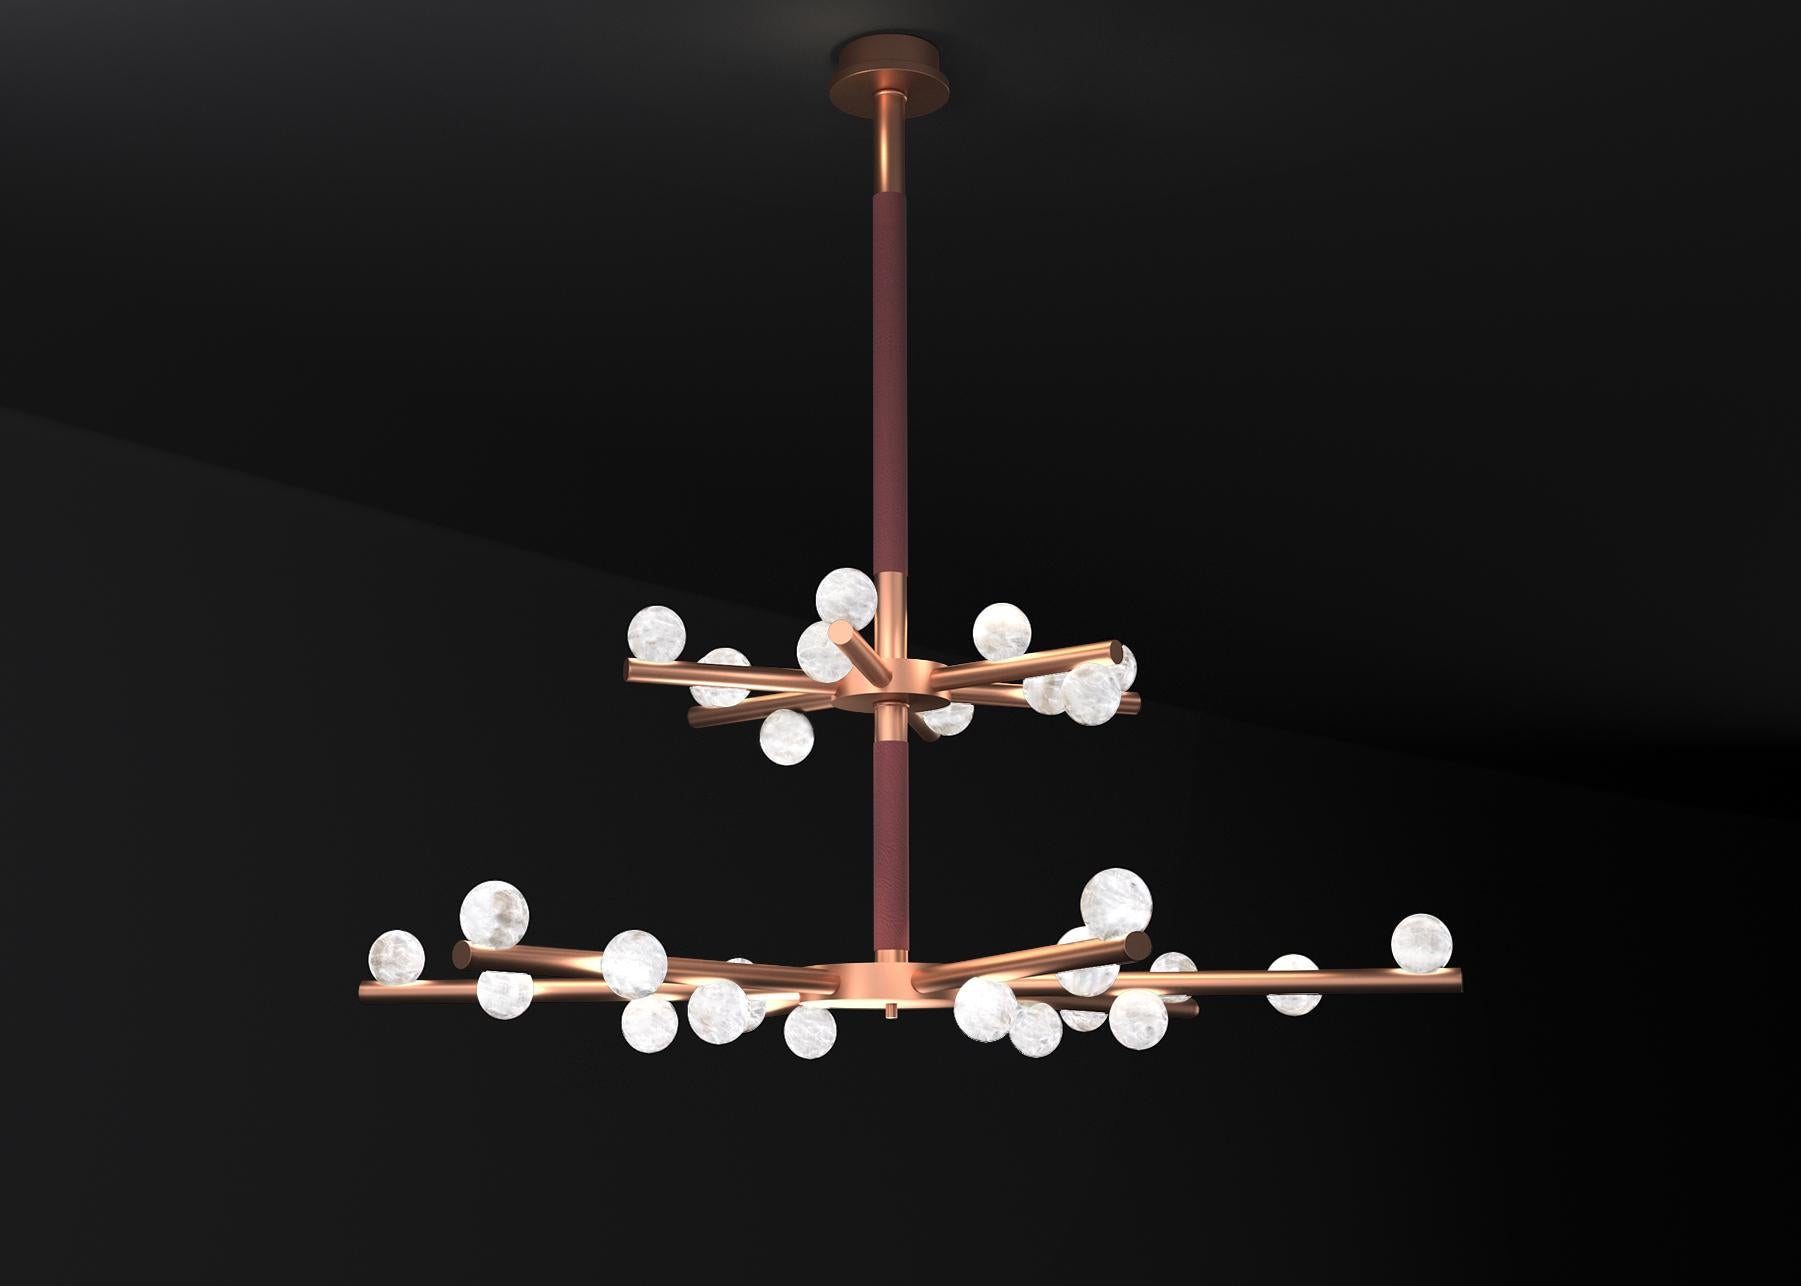 Demetra Copper Double Chandelier by Alabastro Italiano
Dimensions: D 85 x W 97 x H 96 cm.
Materials: White alabaster, copper and leather.

Available in different finishes: Shiny Silver, Bronze, Brushed Brass, Ruggine of Florence, Brushed Burnished,